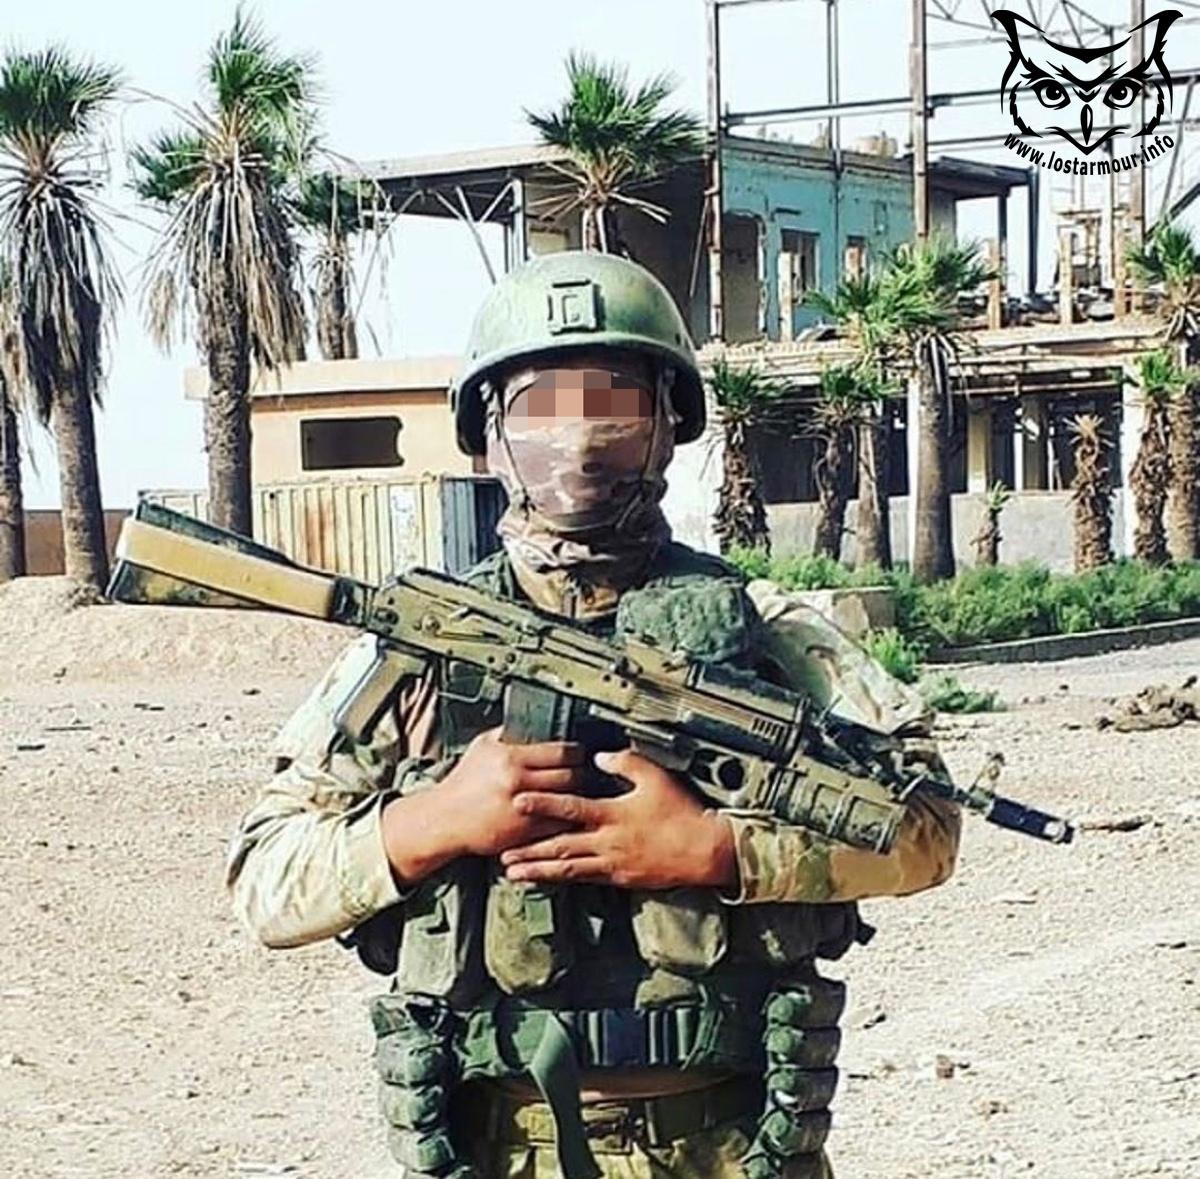 Photos of Russian spetsnaz in Syria. 4/ https://vk.com/russian_sof?w=wall-138000218_62778